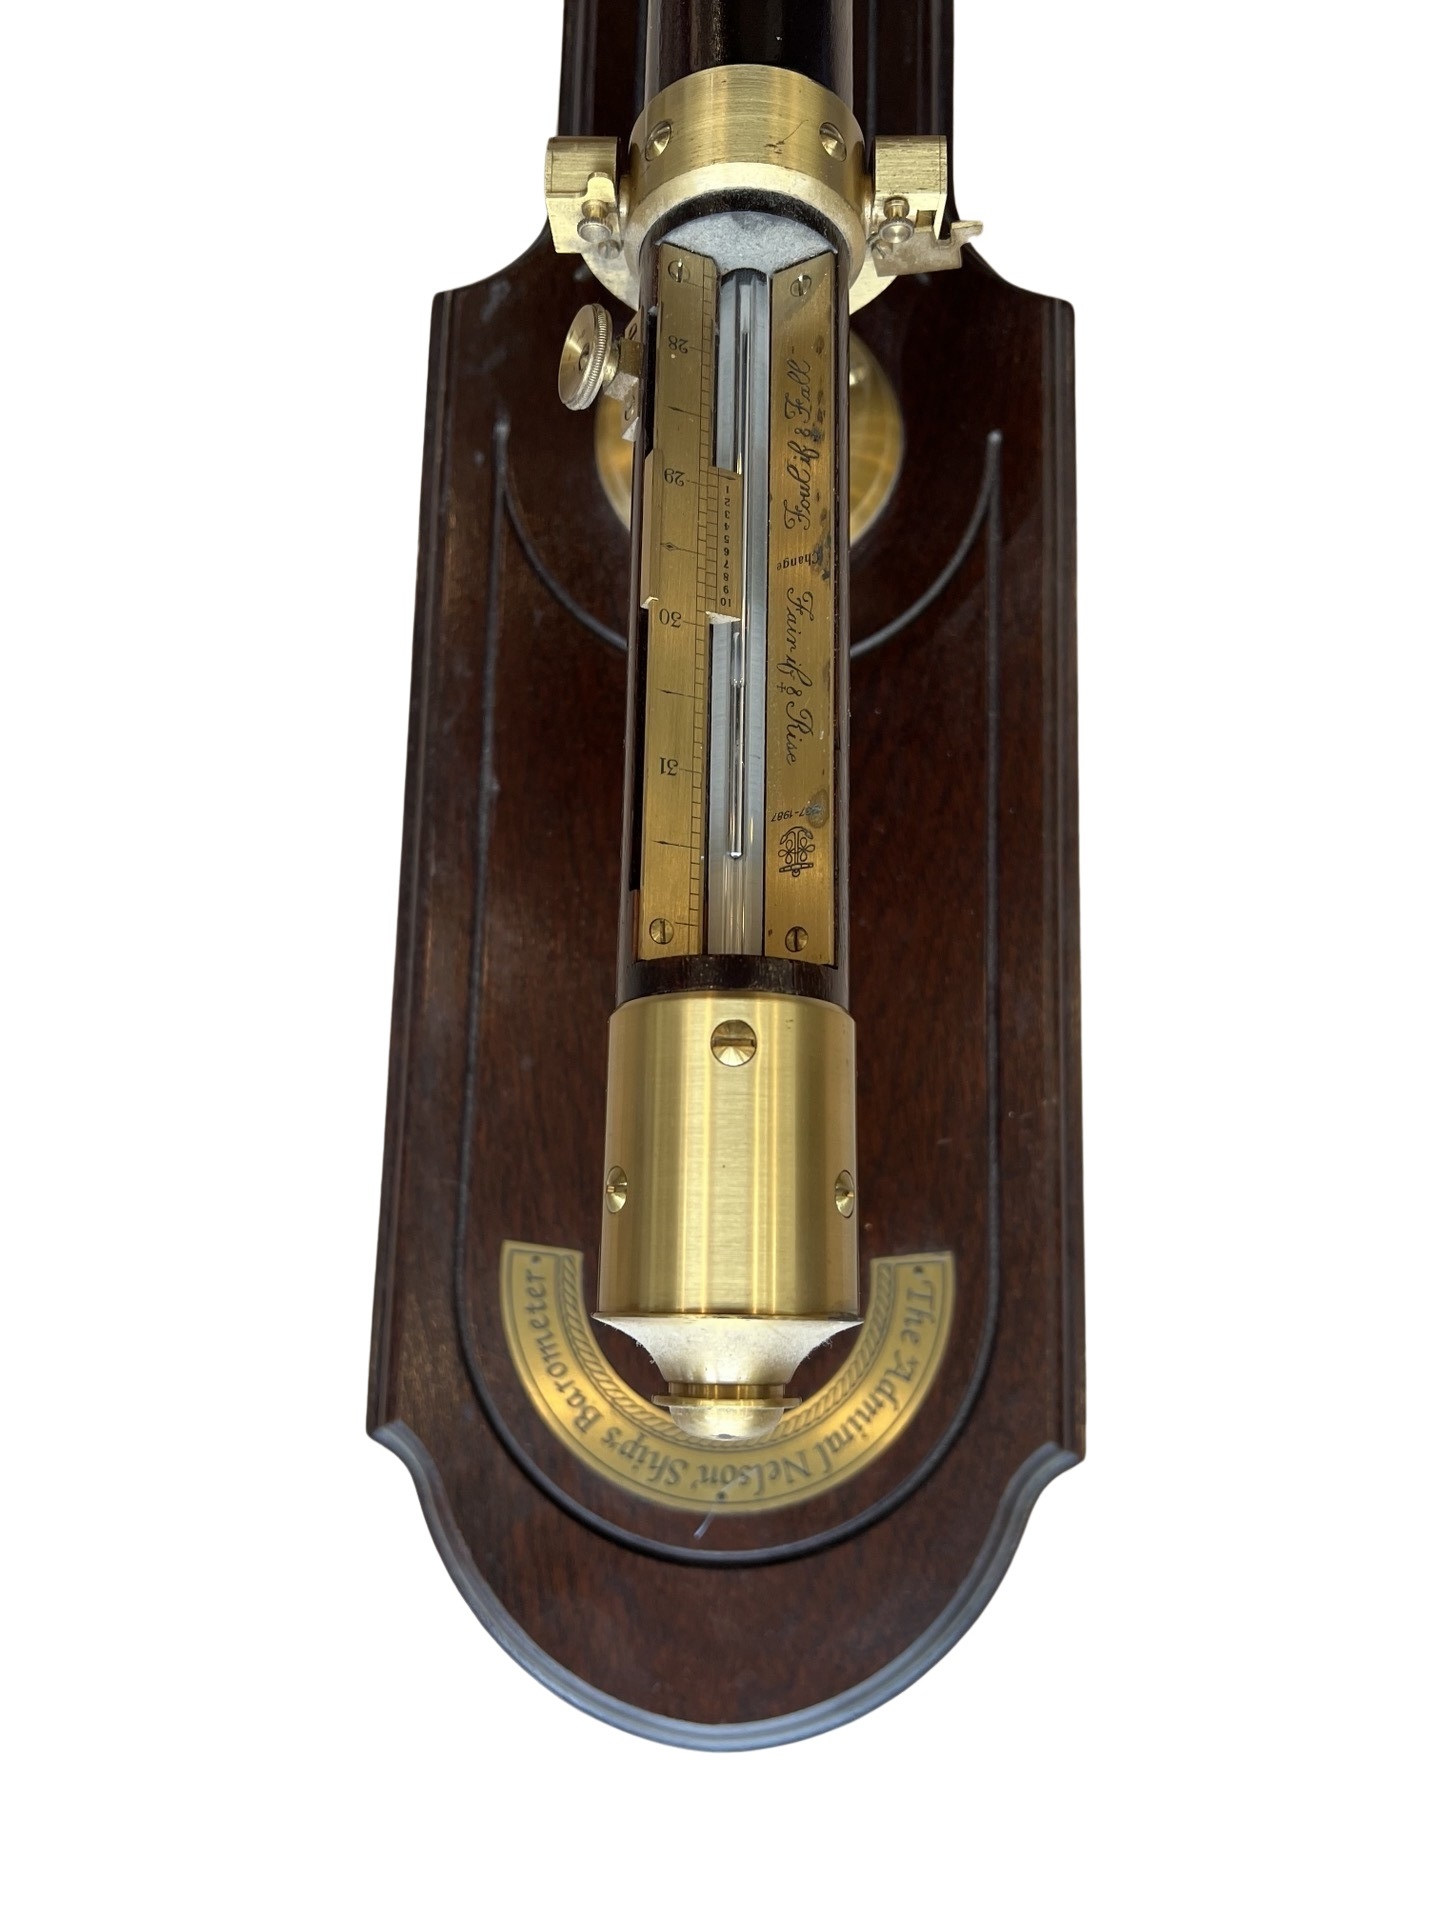 A COMMEMORATIVE ADMIRAL NELSON SHIP'S BAROMETER - Image 3 of 4